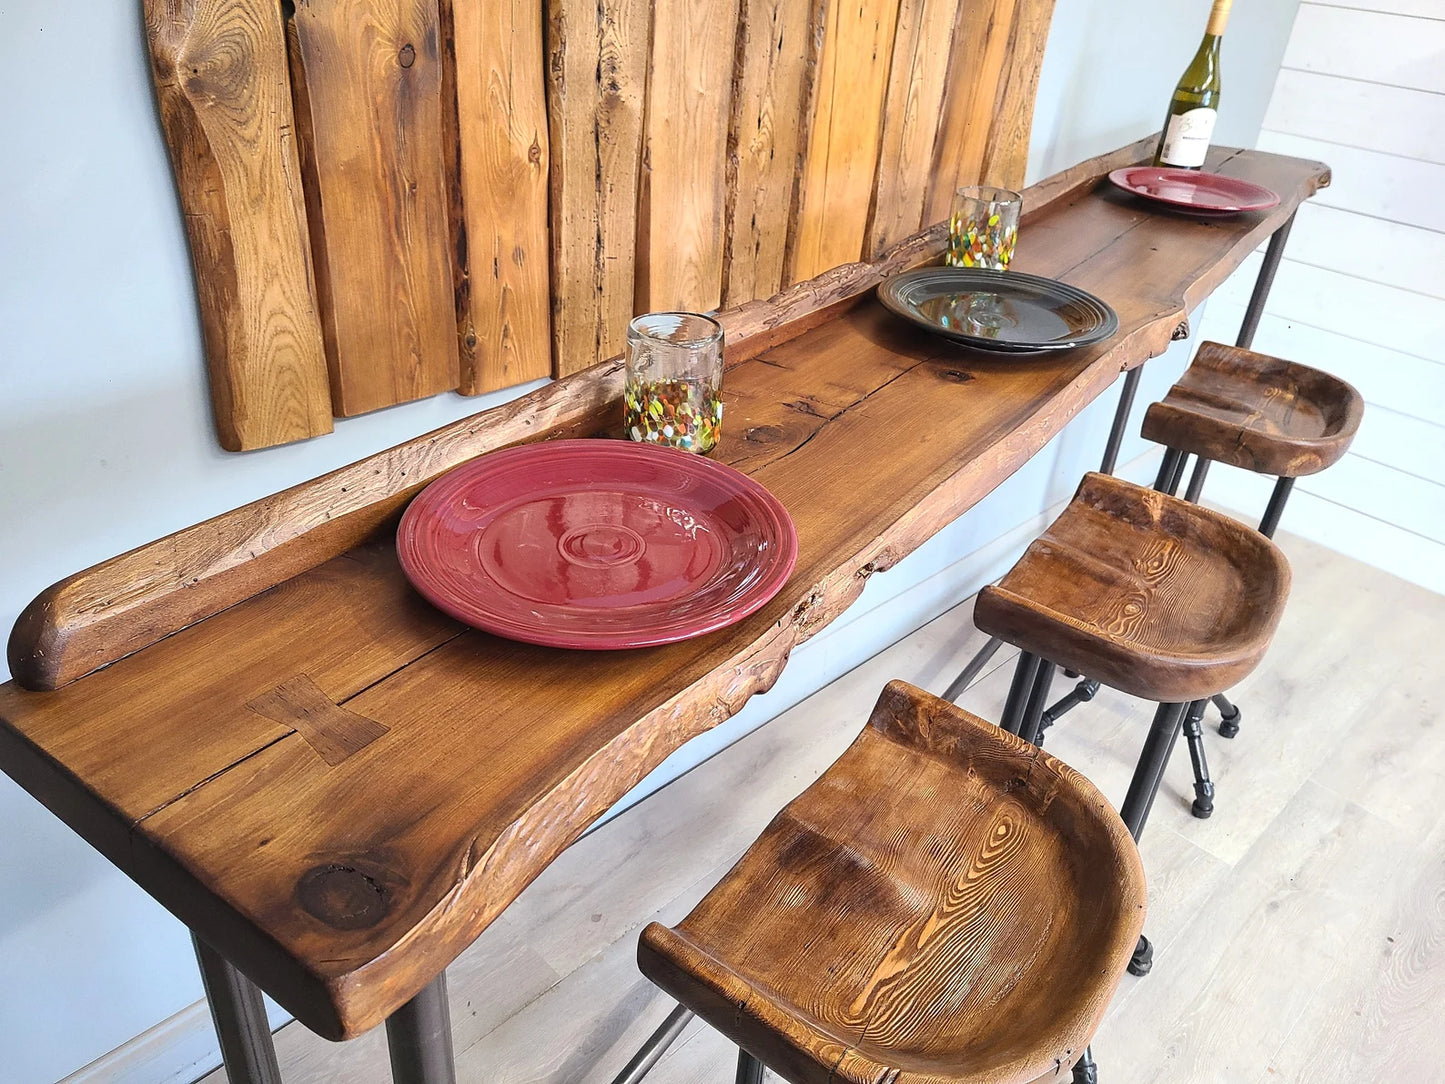 ON SALE**Drink Rail Bar Table with Wood back rail. 8' Reclaimed wood table in stock today